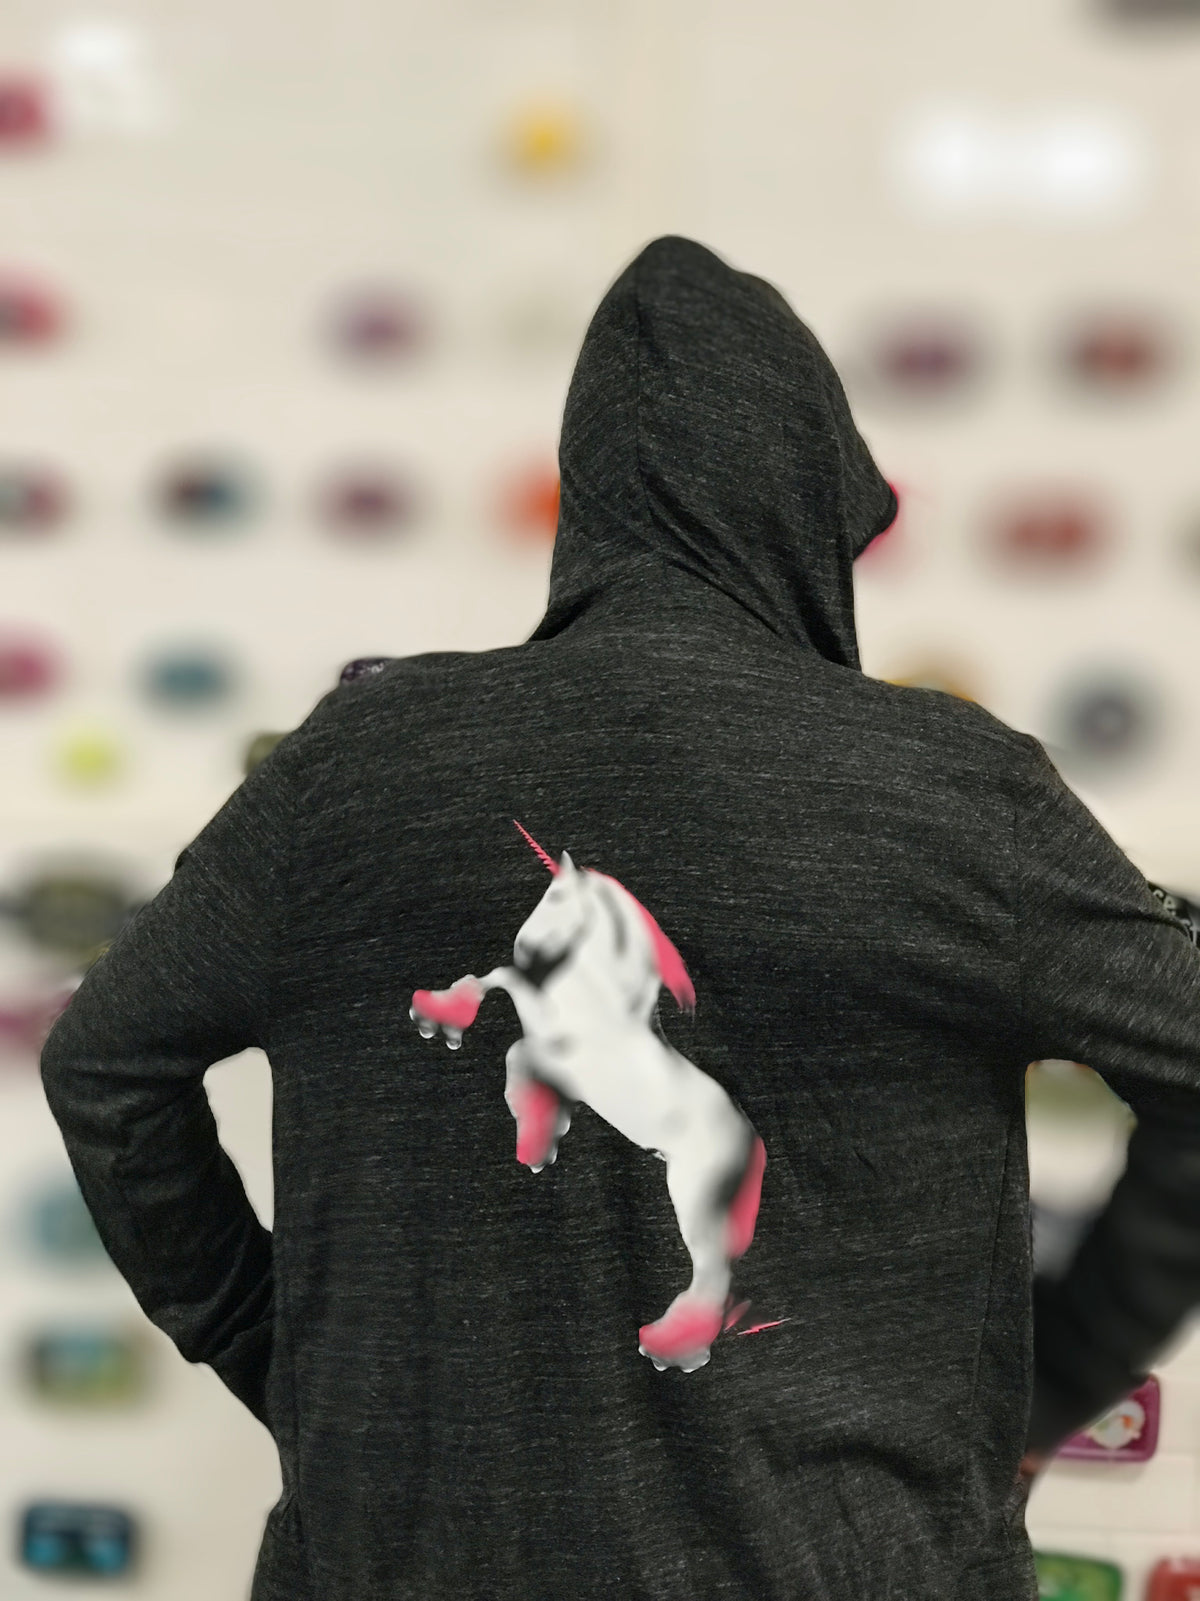 Heathered gray lightweight hoodie with a roller skating unicorn screenprinted on the back in white and hot pink. 